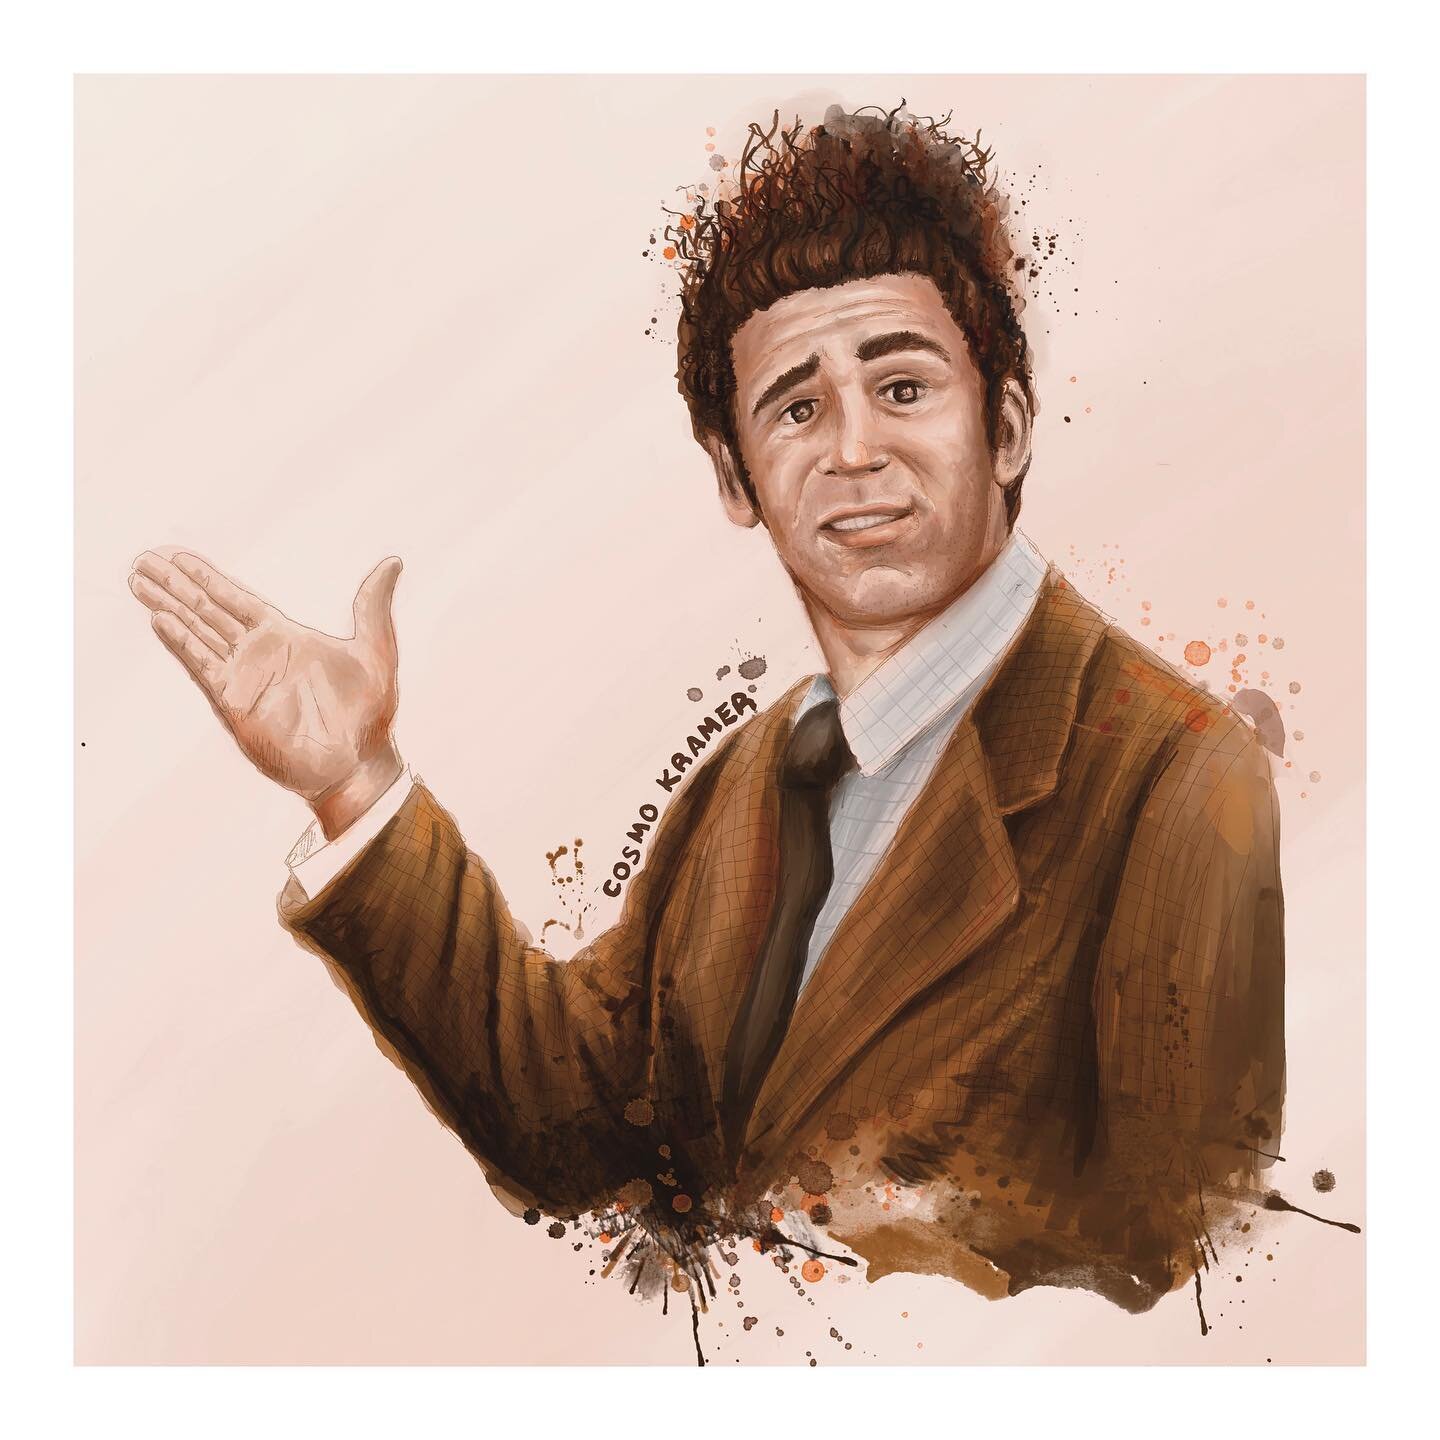 I&rsquo;ve gone to memory lane and been watching #seinfeld&hellip; I couldn&rsquo;t help myself, one of my favorite characters #cosmokramer #cosmokramergram #cosmokramerthedog